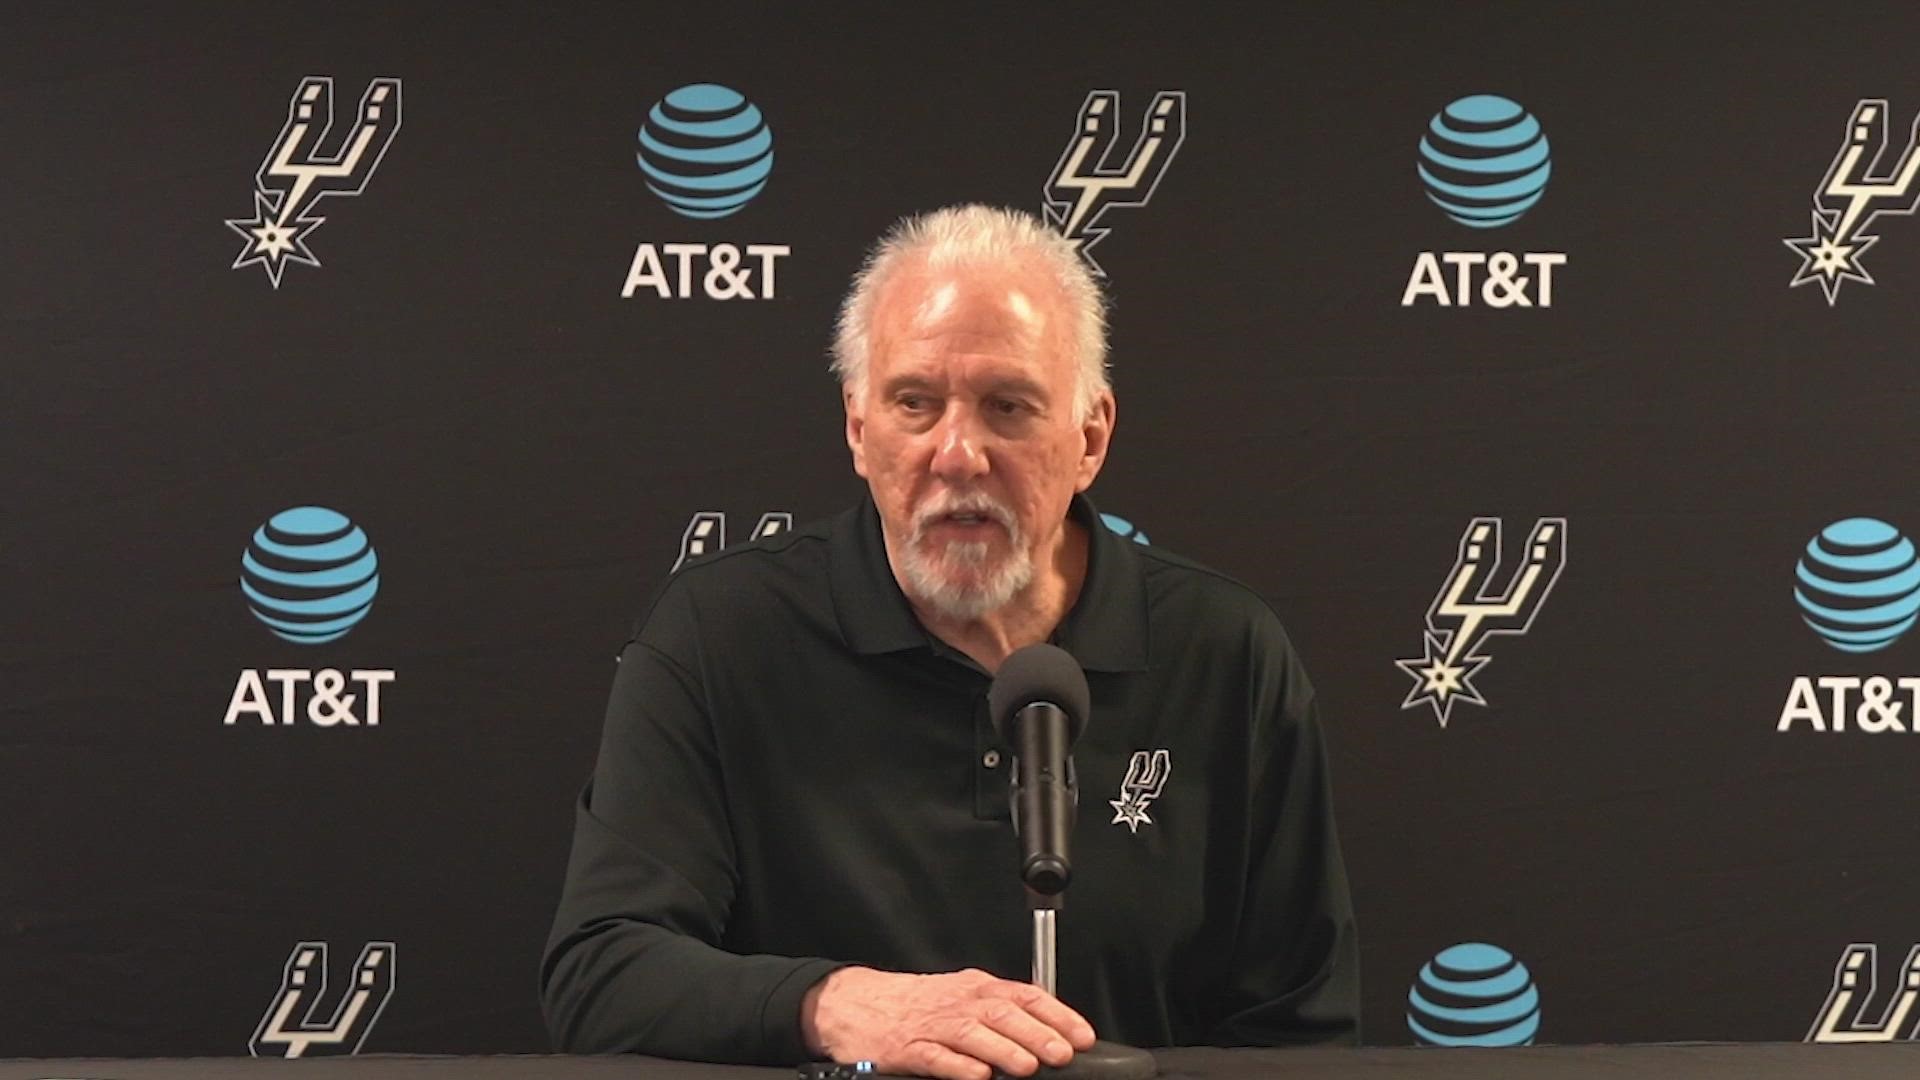 Pop said his team "woke up" at halftime, and complimented Zach Collins on the first double-double of his career.